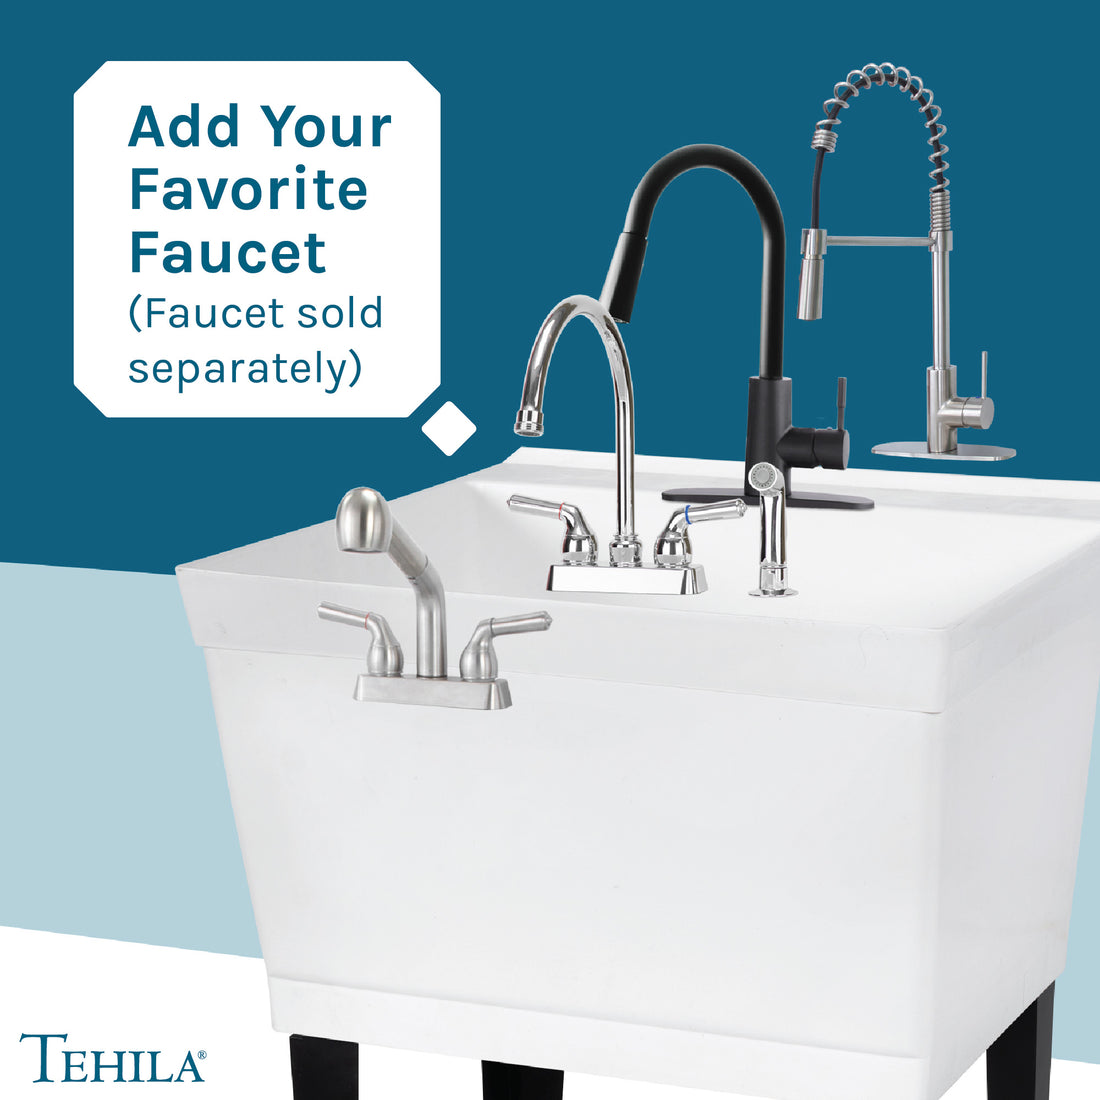 Standard Utility Sink Add Your Favorite Faucet (Faucet sold separately)